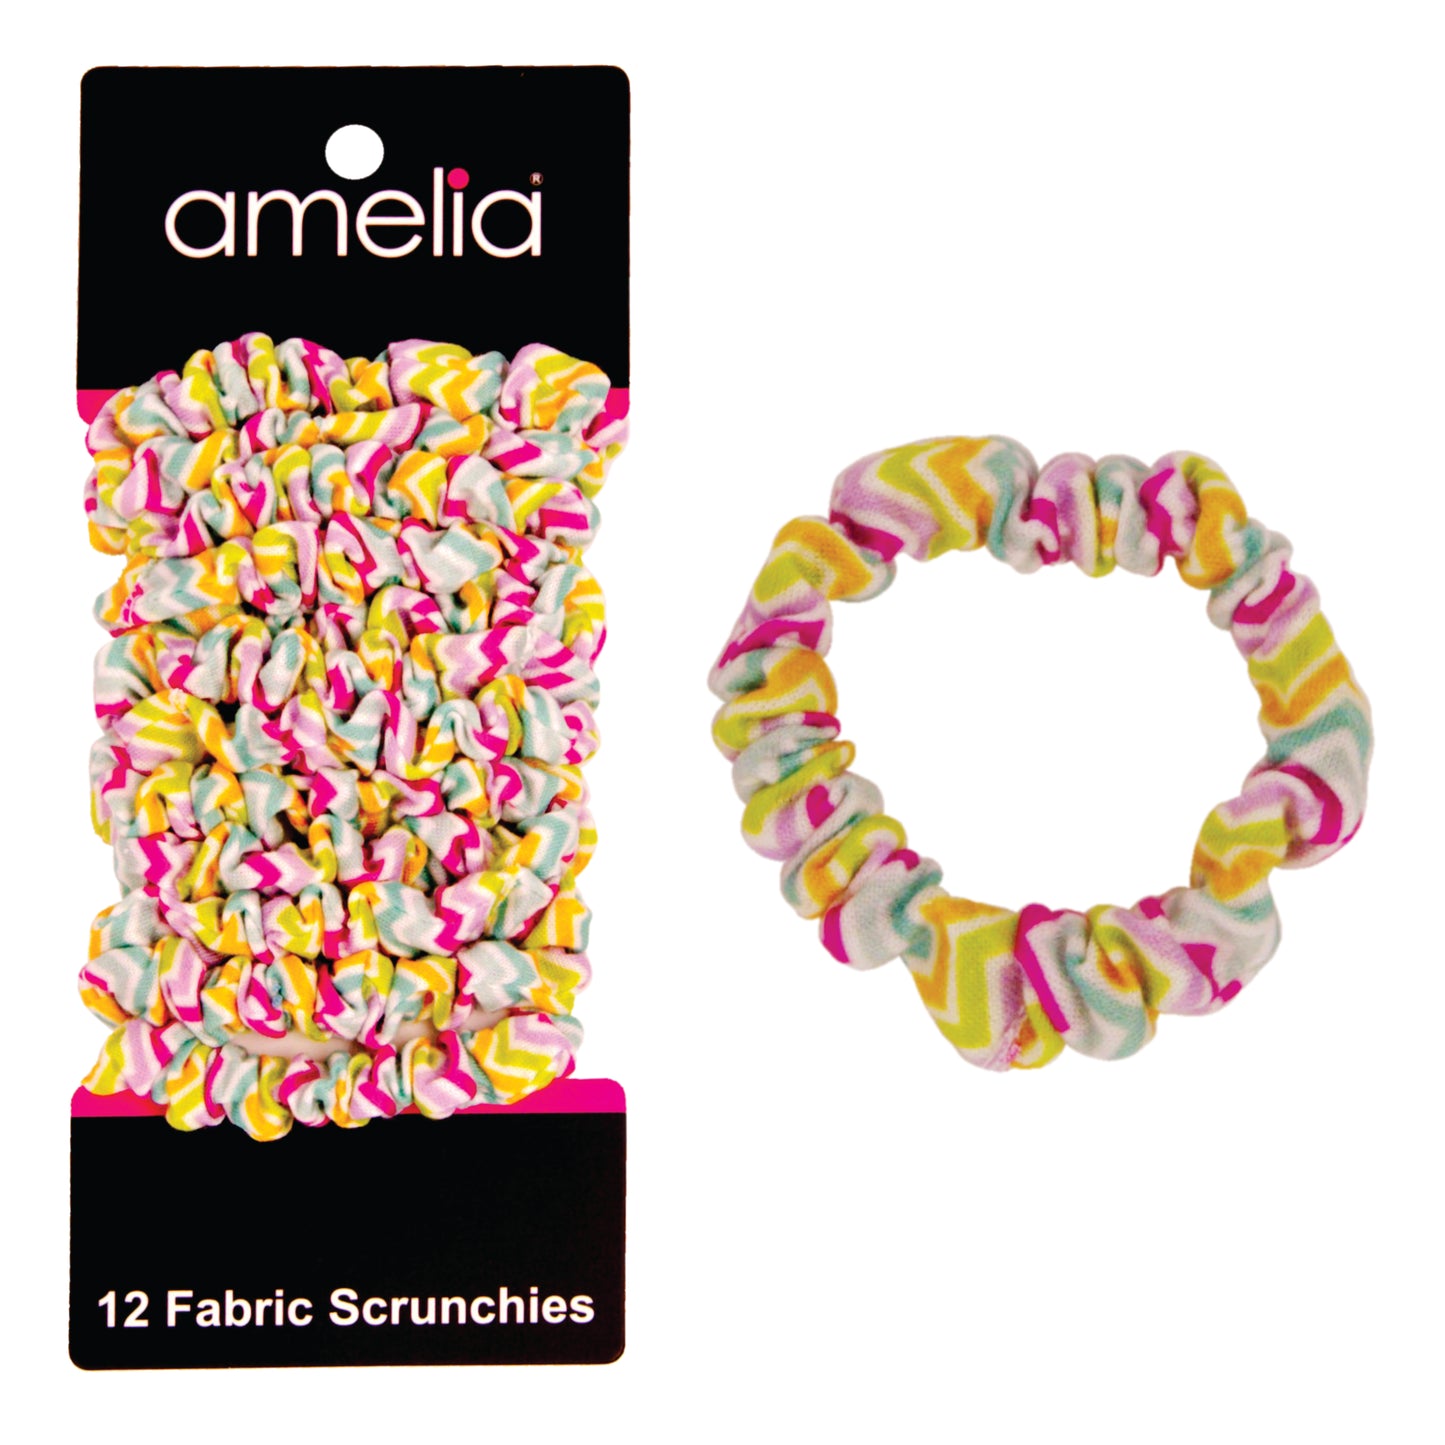 Amelia Beauty, Pastel Stripe Jersey Scrunchies, 2.25in Diameter, Gentle on Hair, Strong Hold, No Snag, No Dents or Creases. 12 Pack